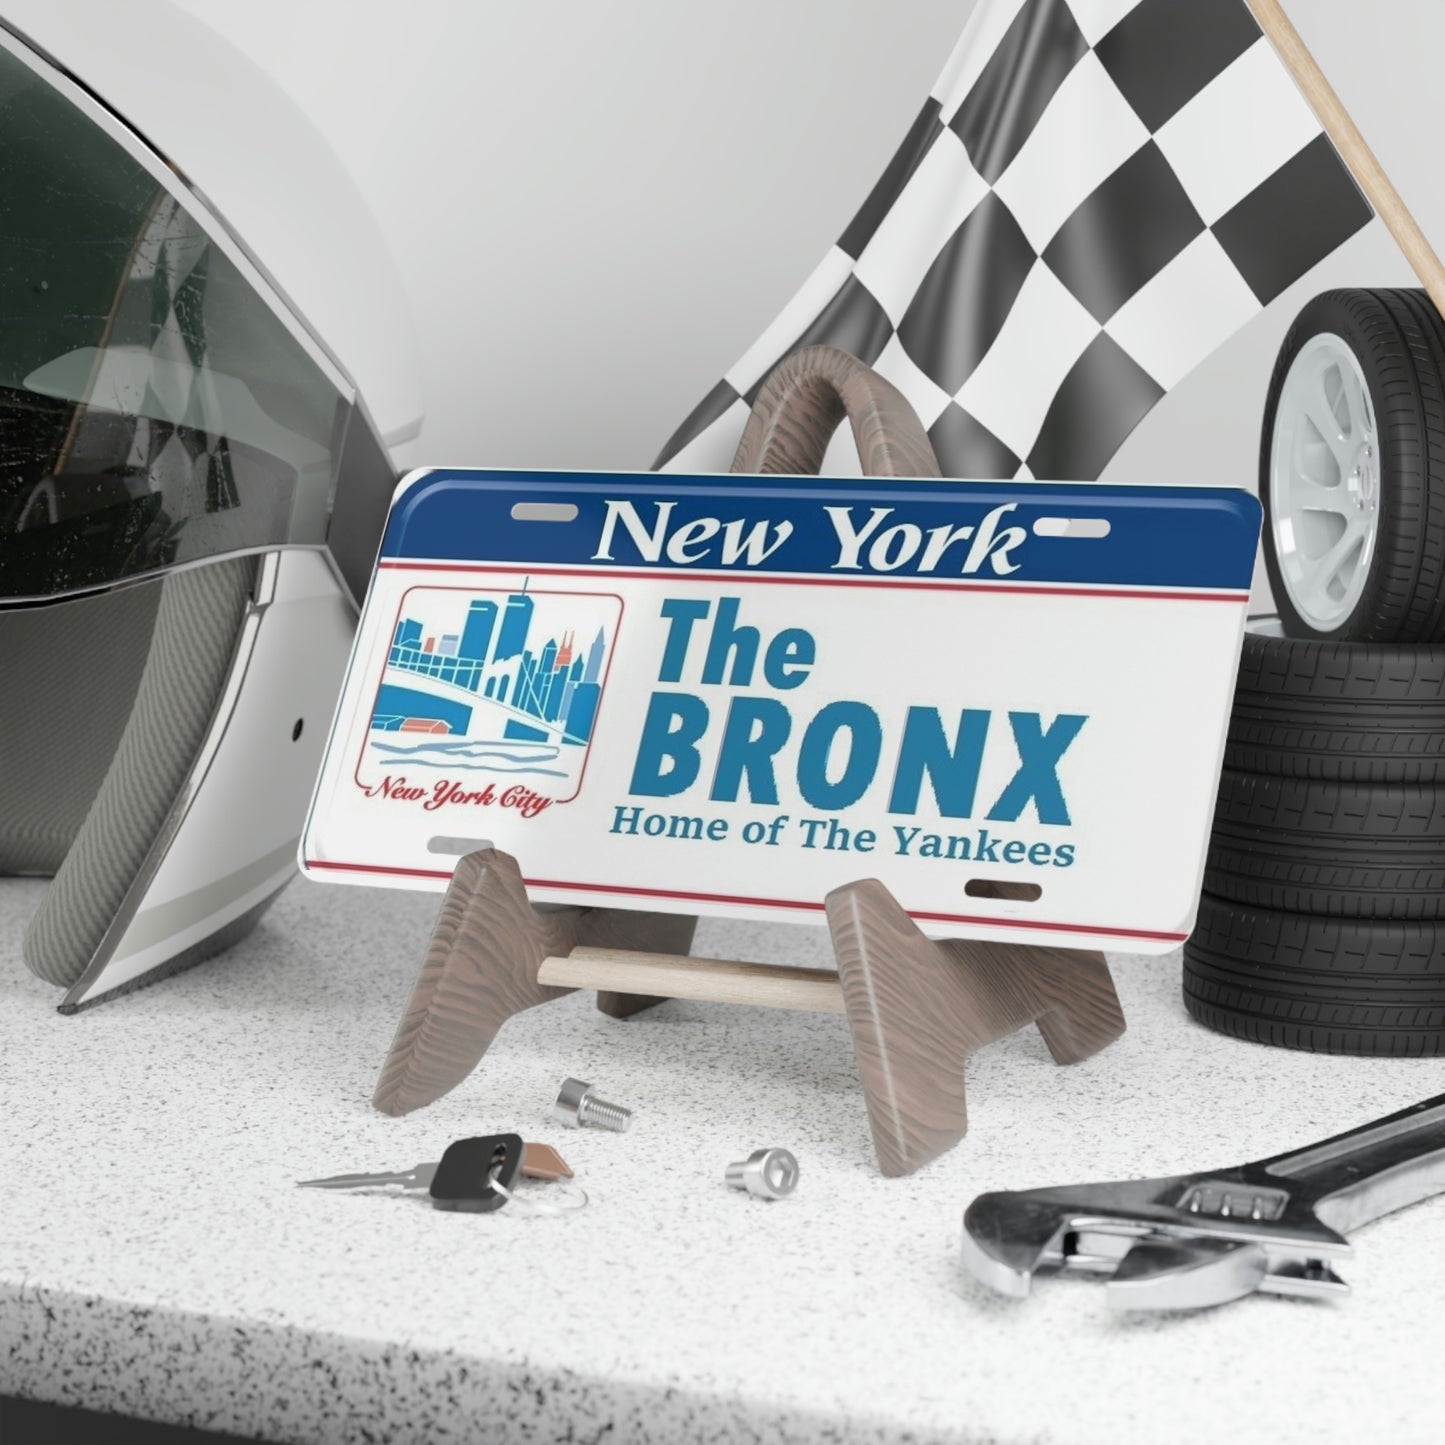 The Bronx NY Vanity License Plate On a Redestal